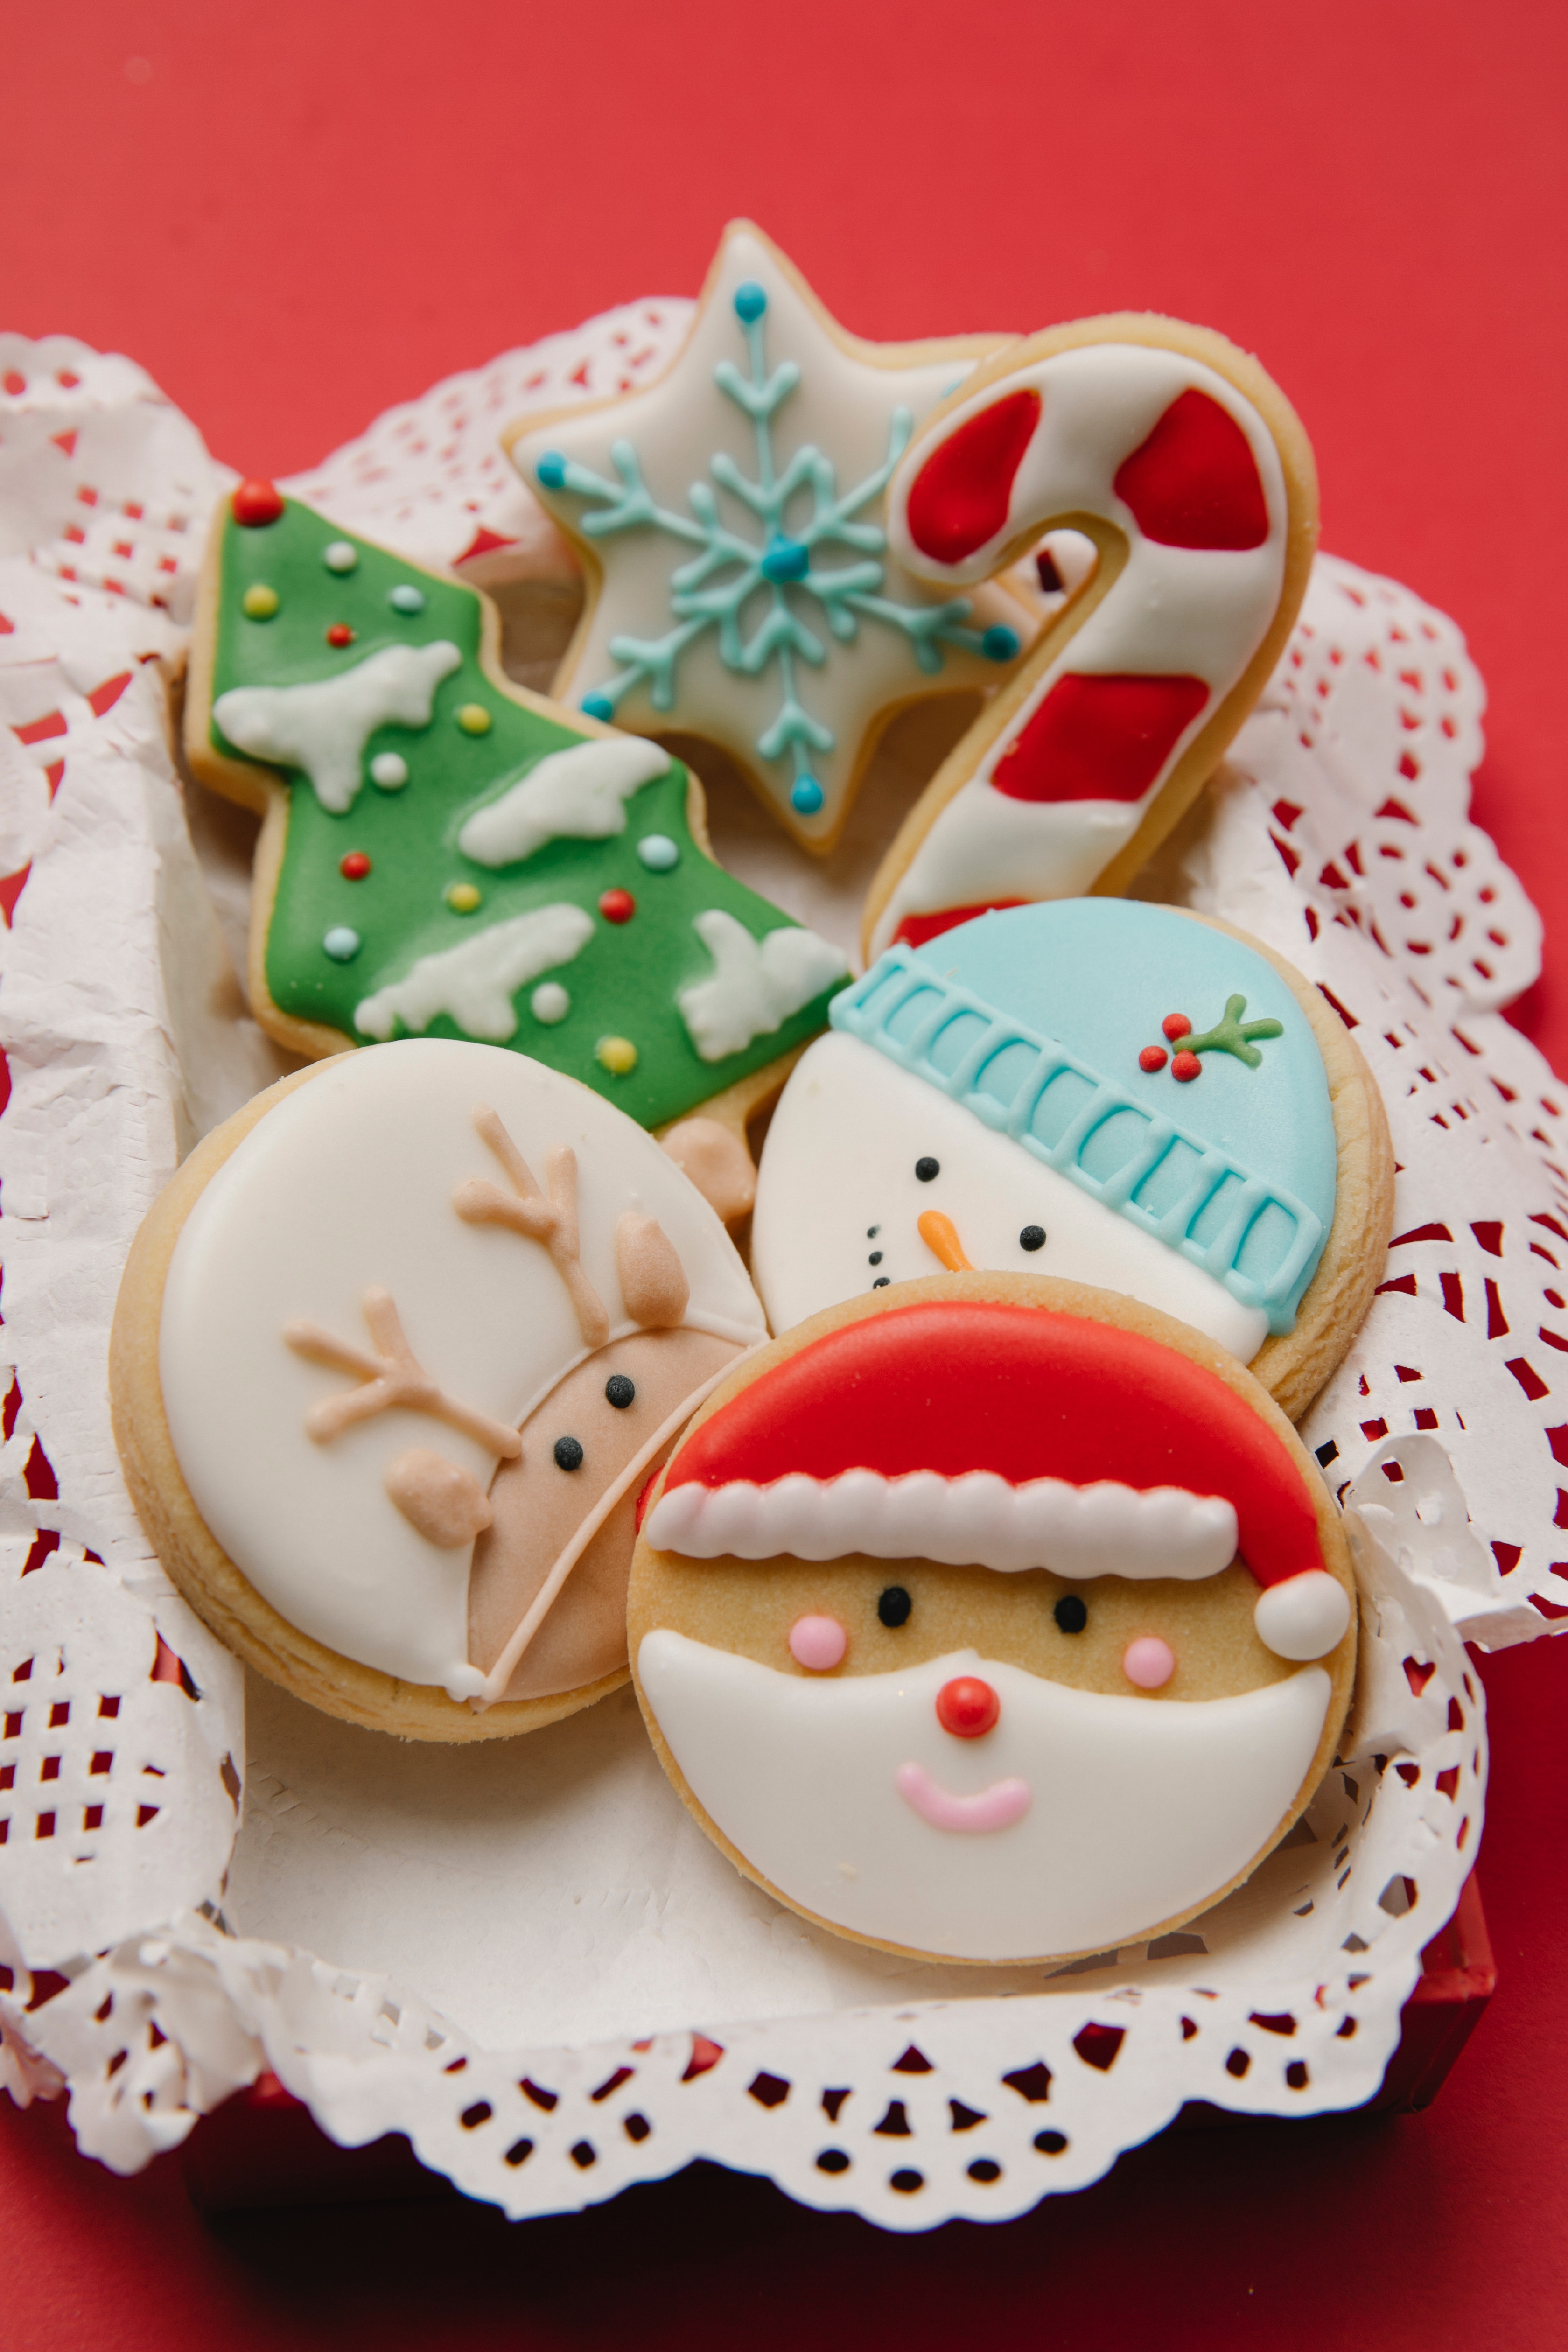 Decorated Christmas cookies on lace-trimmed tray.